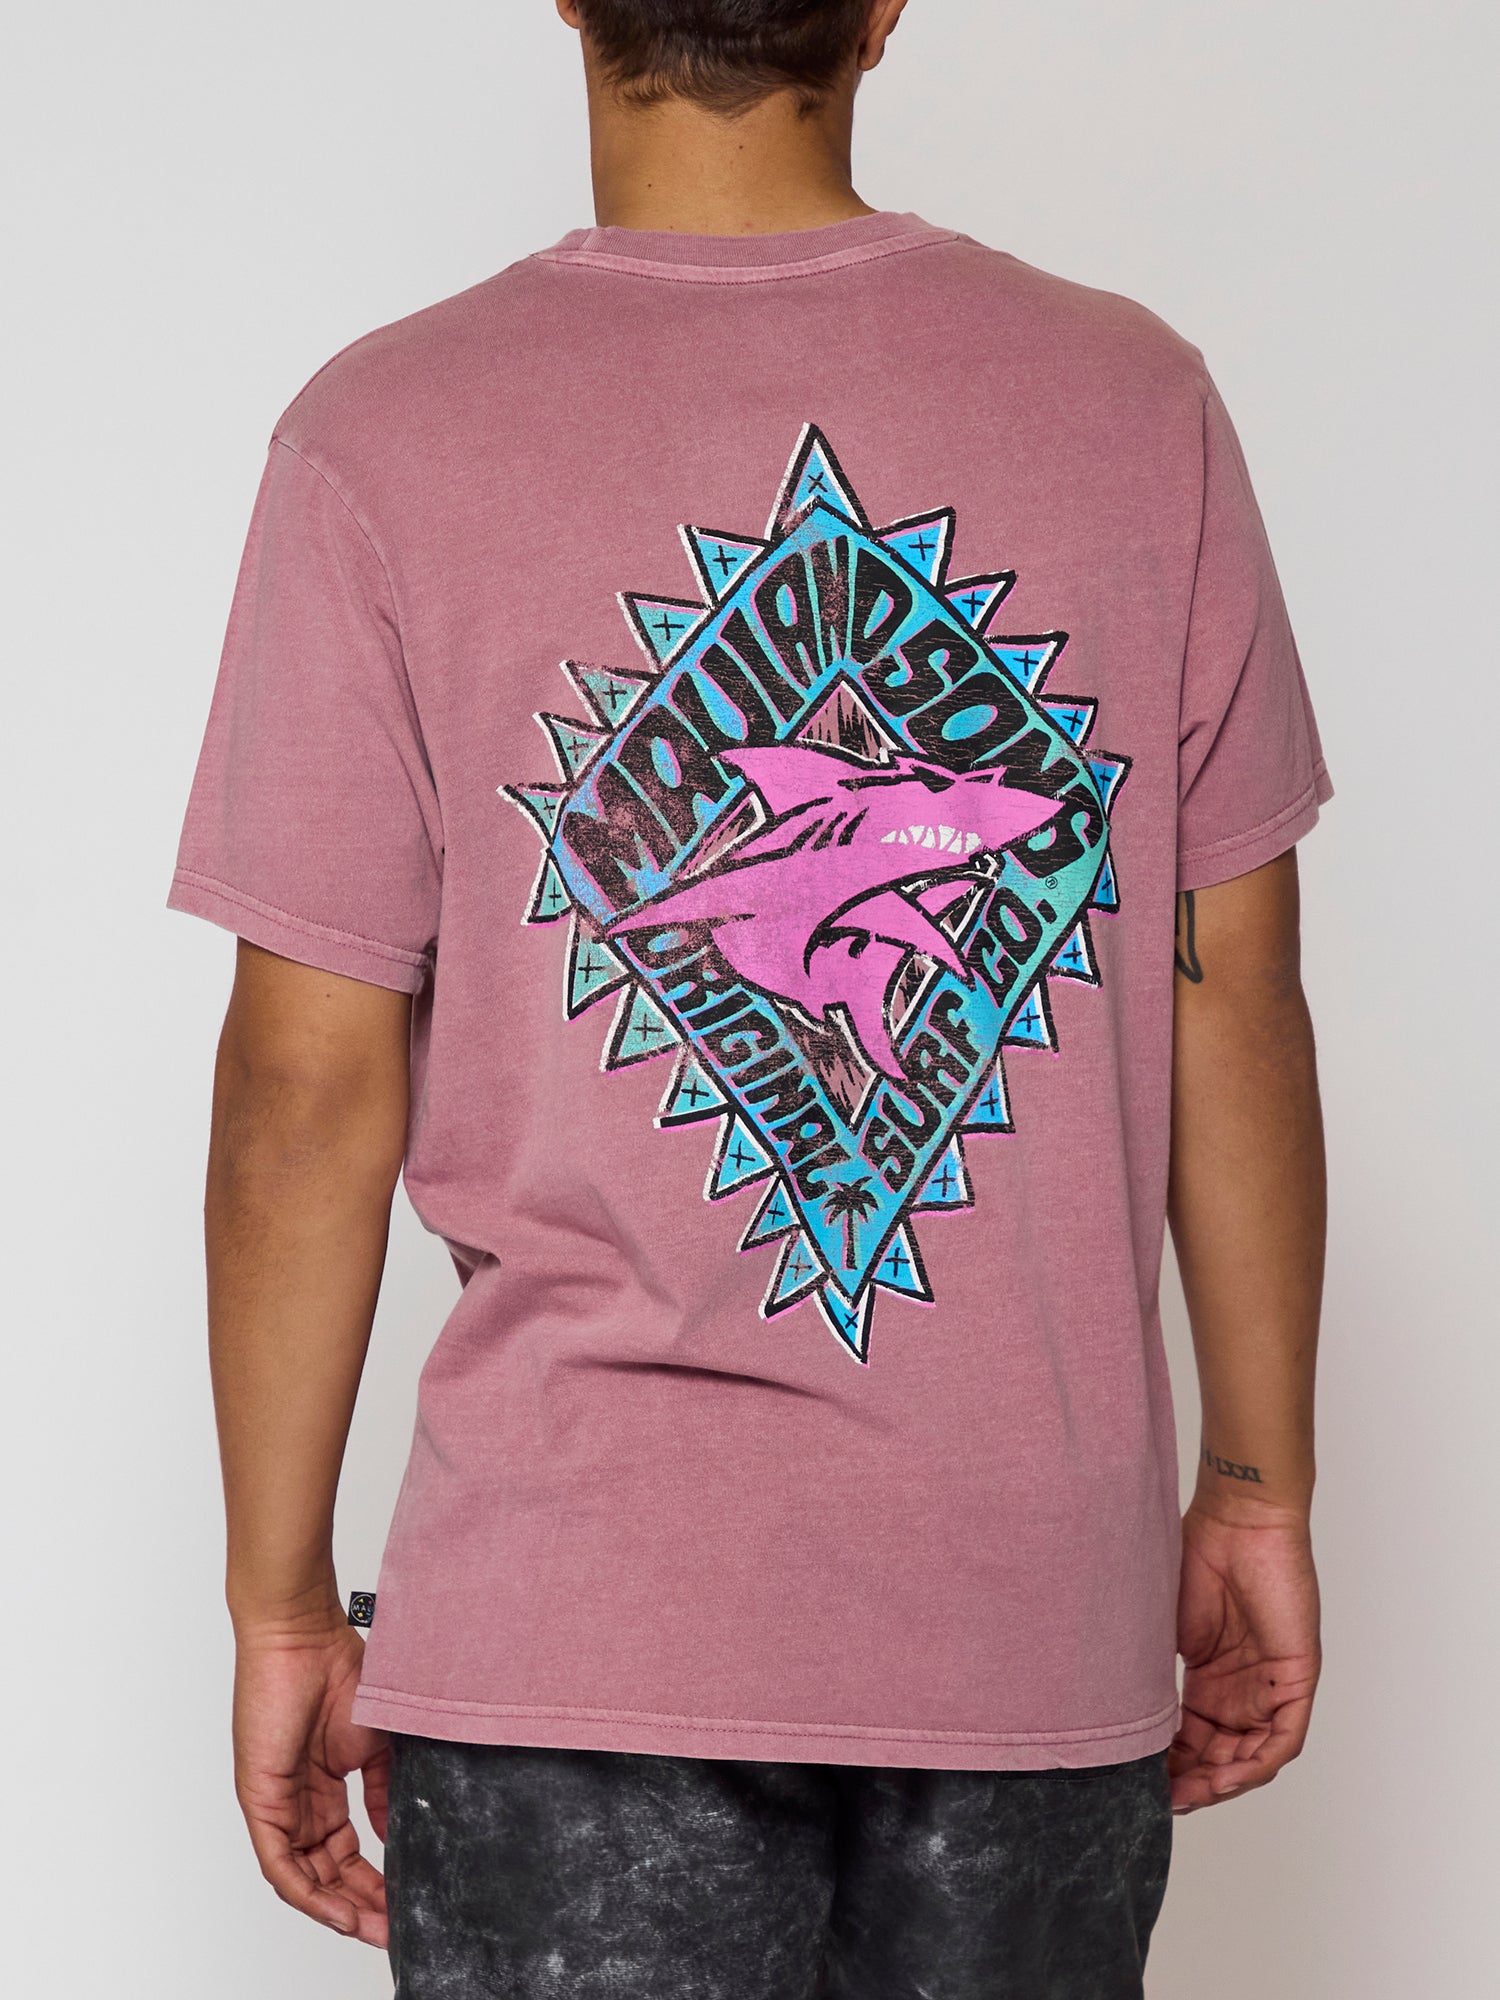 Back to Back Unisex T-Shirt in Foxglove